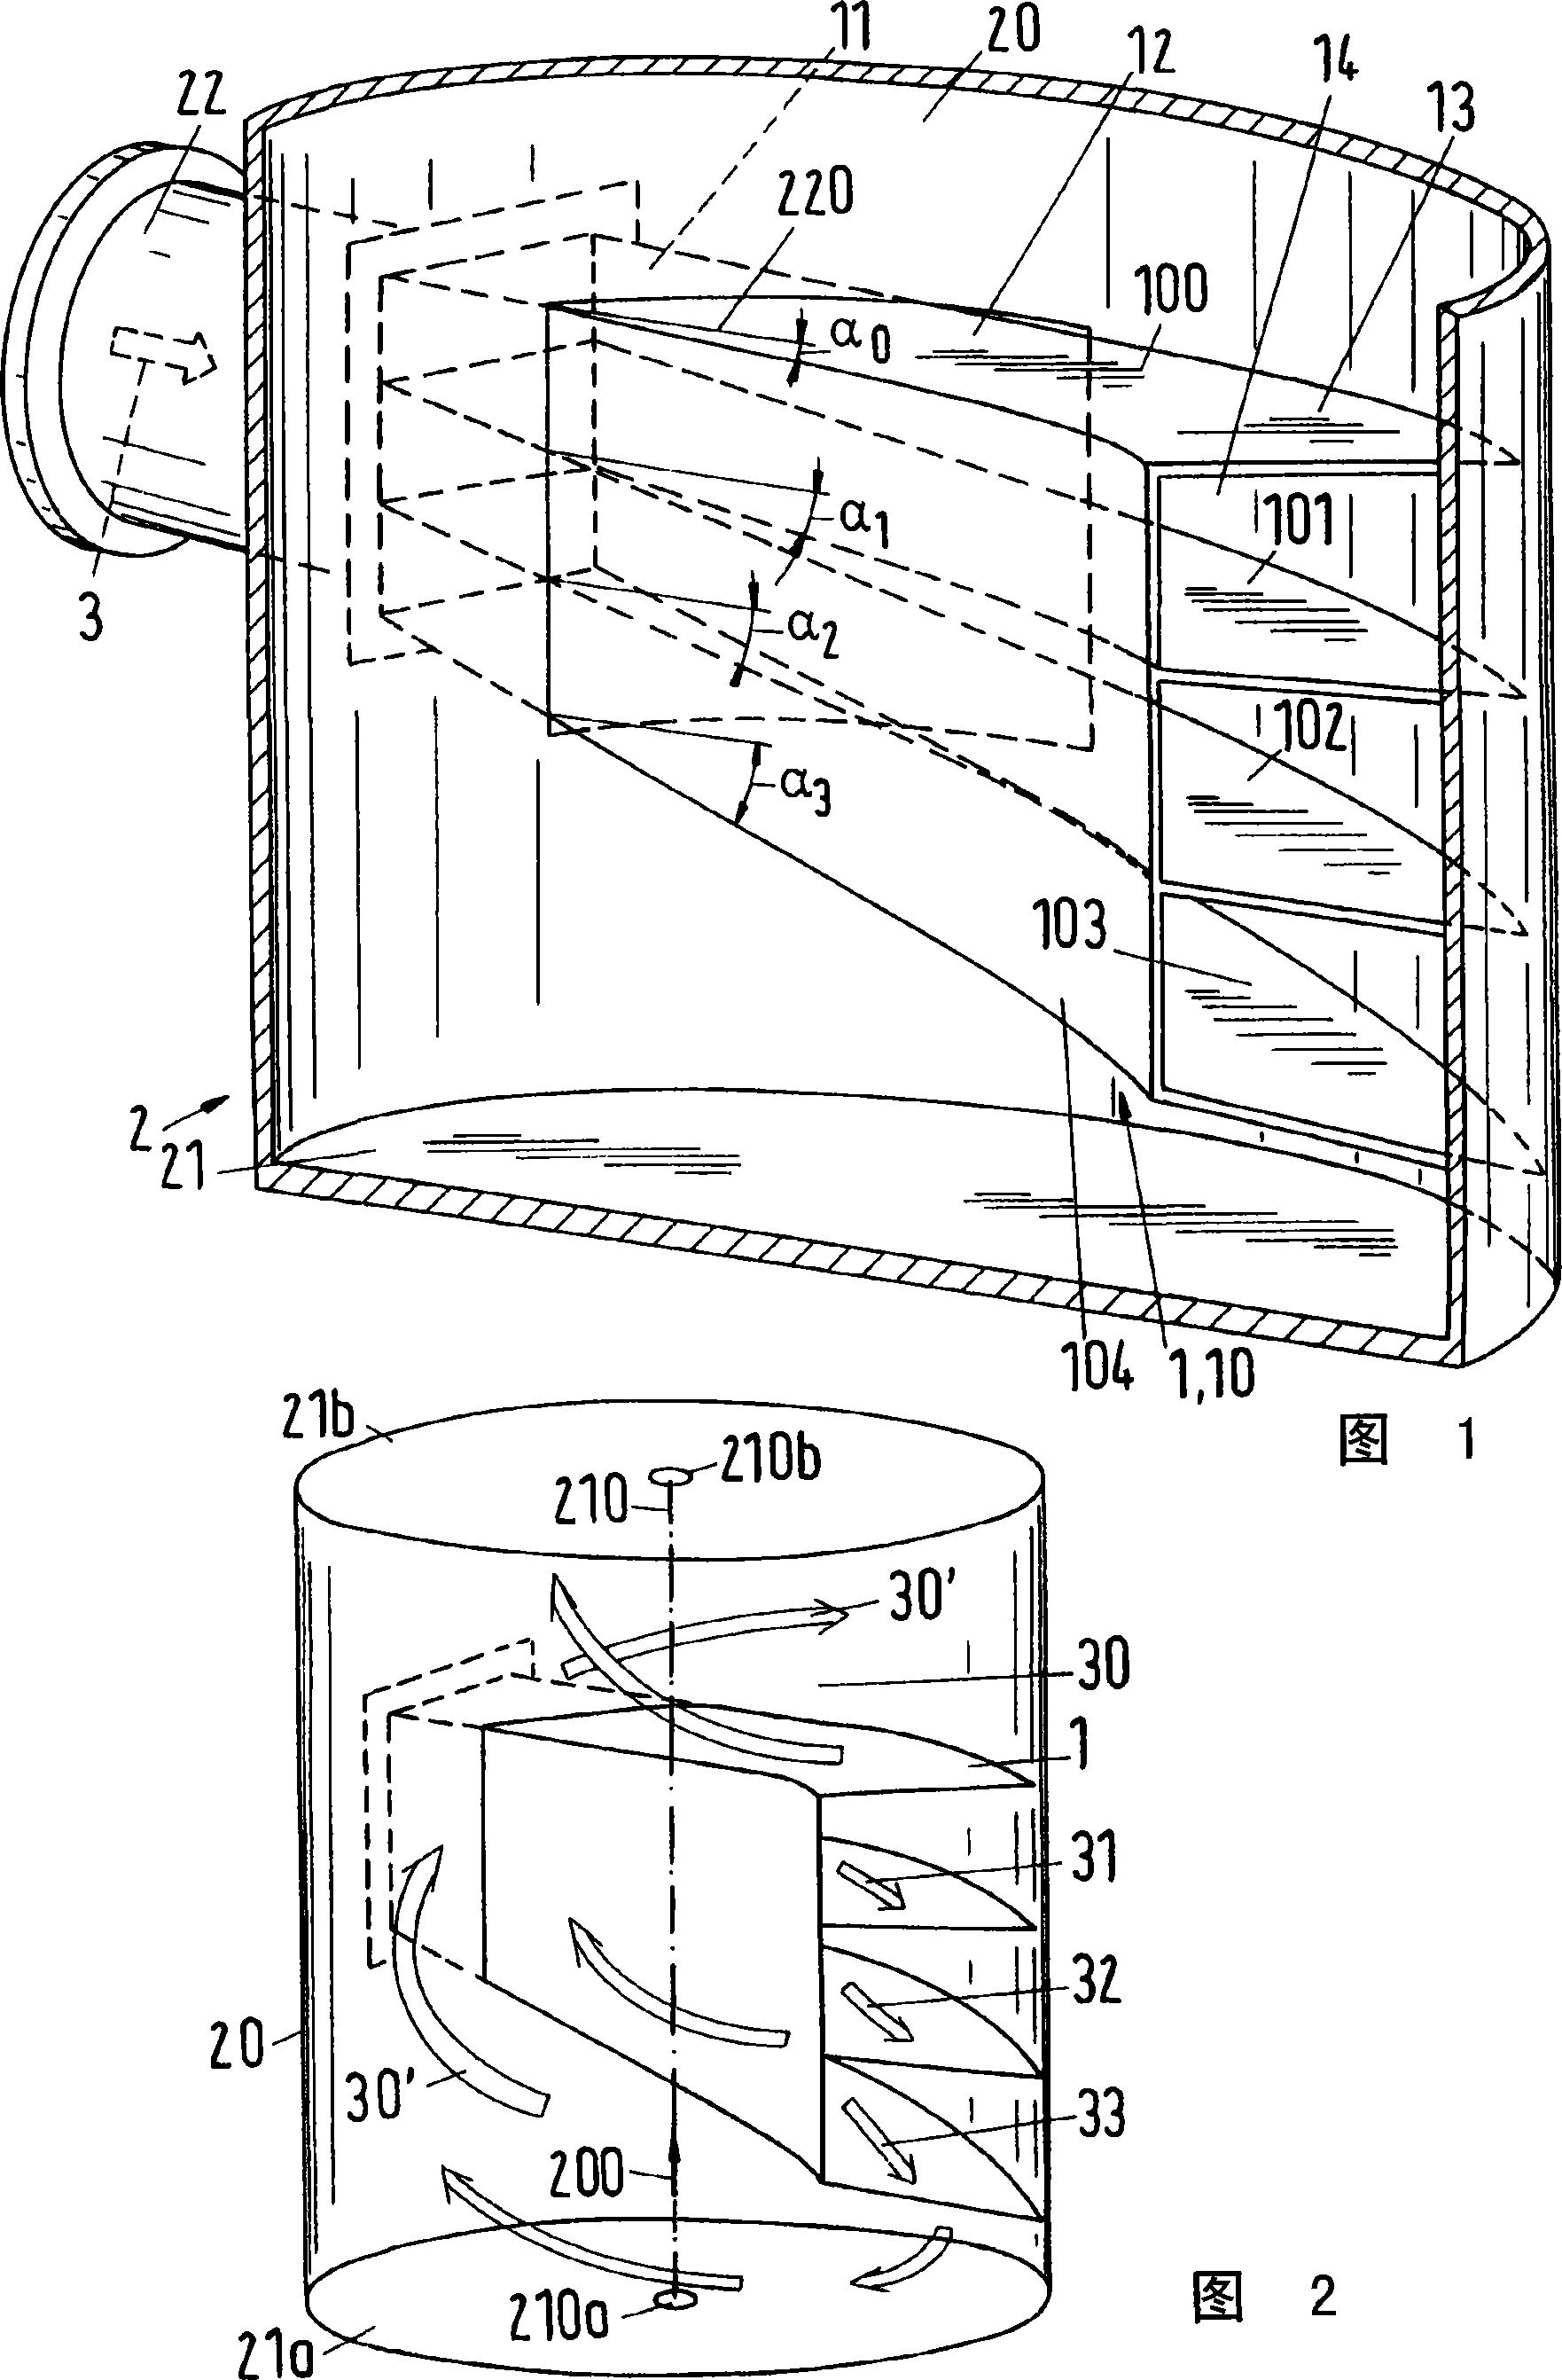 An inlet device for a fluid fed tangentially into an apparatus